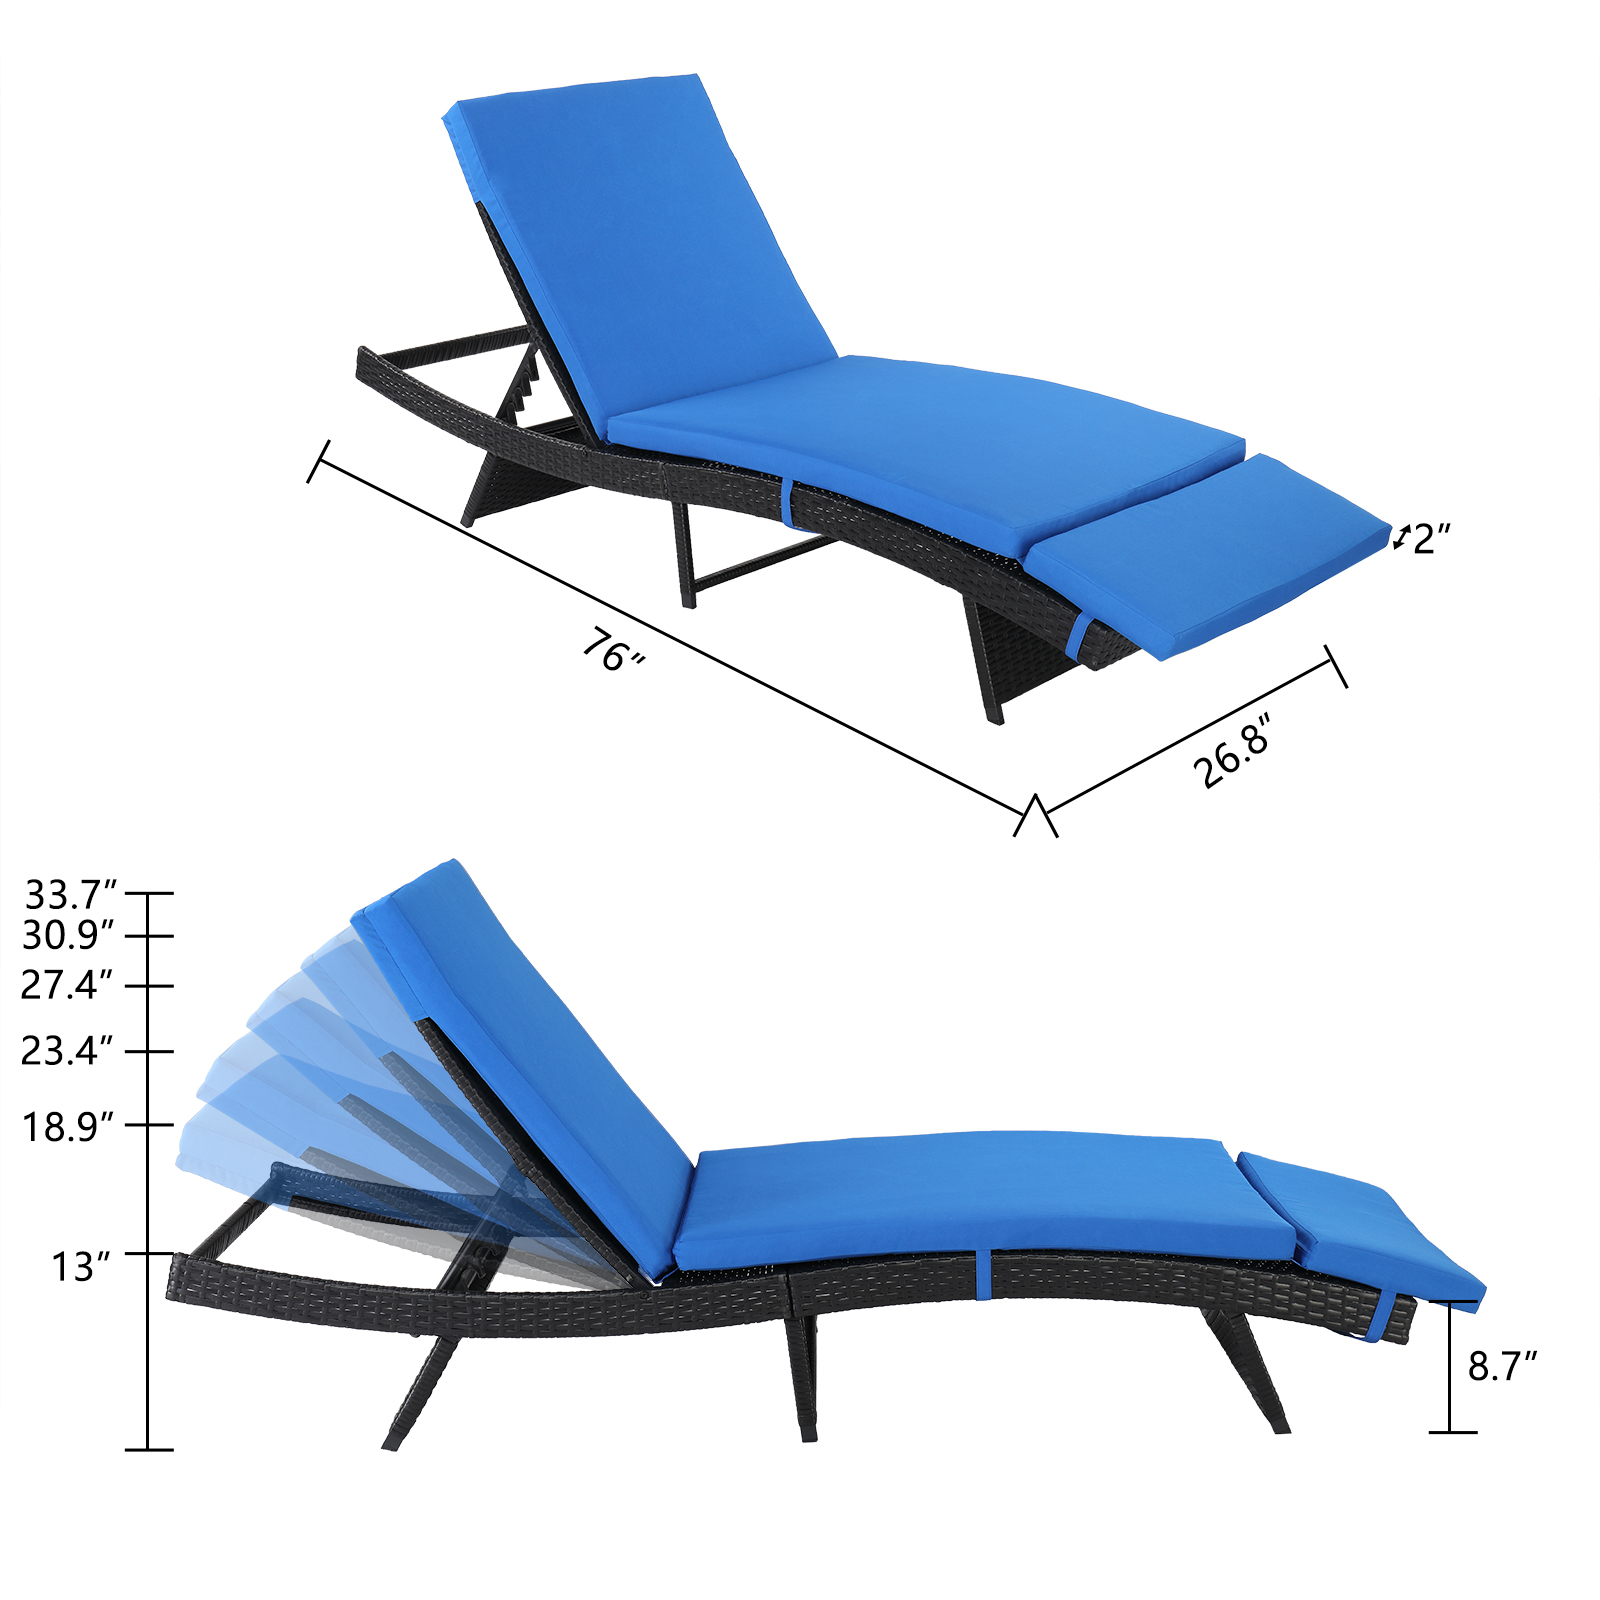 Outdoor Patio PE Wicker Chaise Lounge, 5-Position Adjustable Reclining Lounge Chair, Outdoor Sun Lounger with Removable Cushions for Patio Poolside Backyard Porch Garden, B32 - image 5 of 9